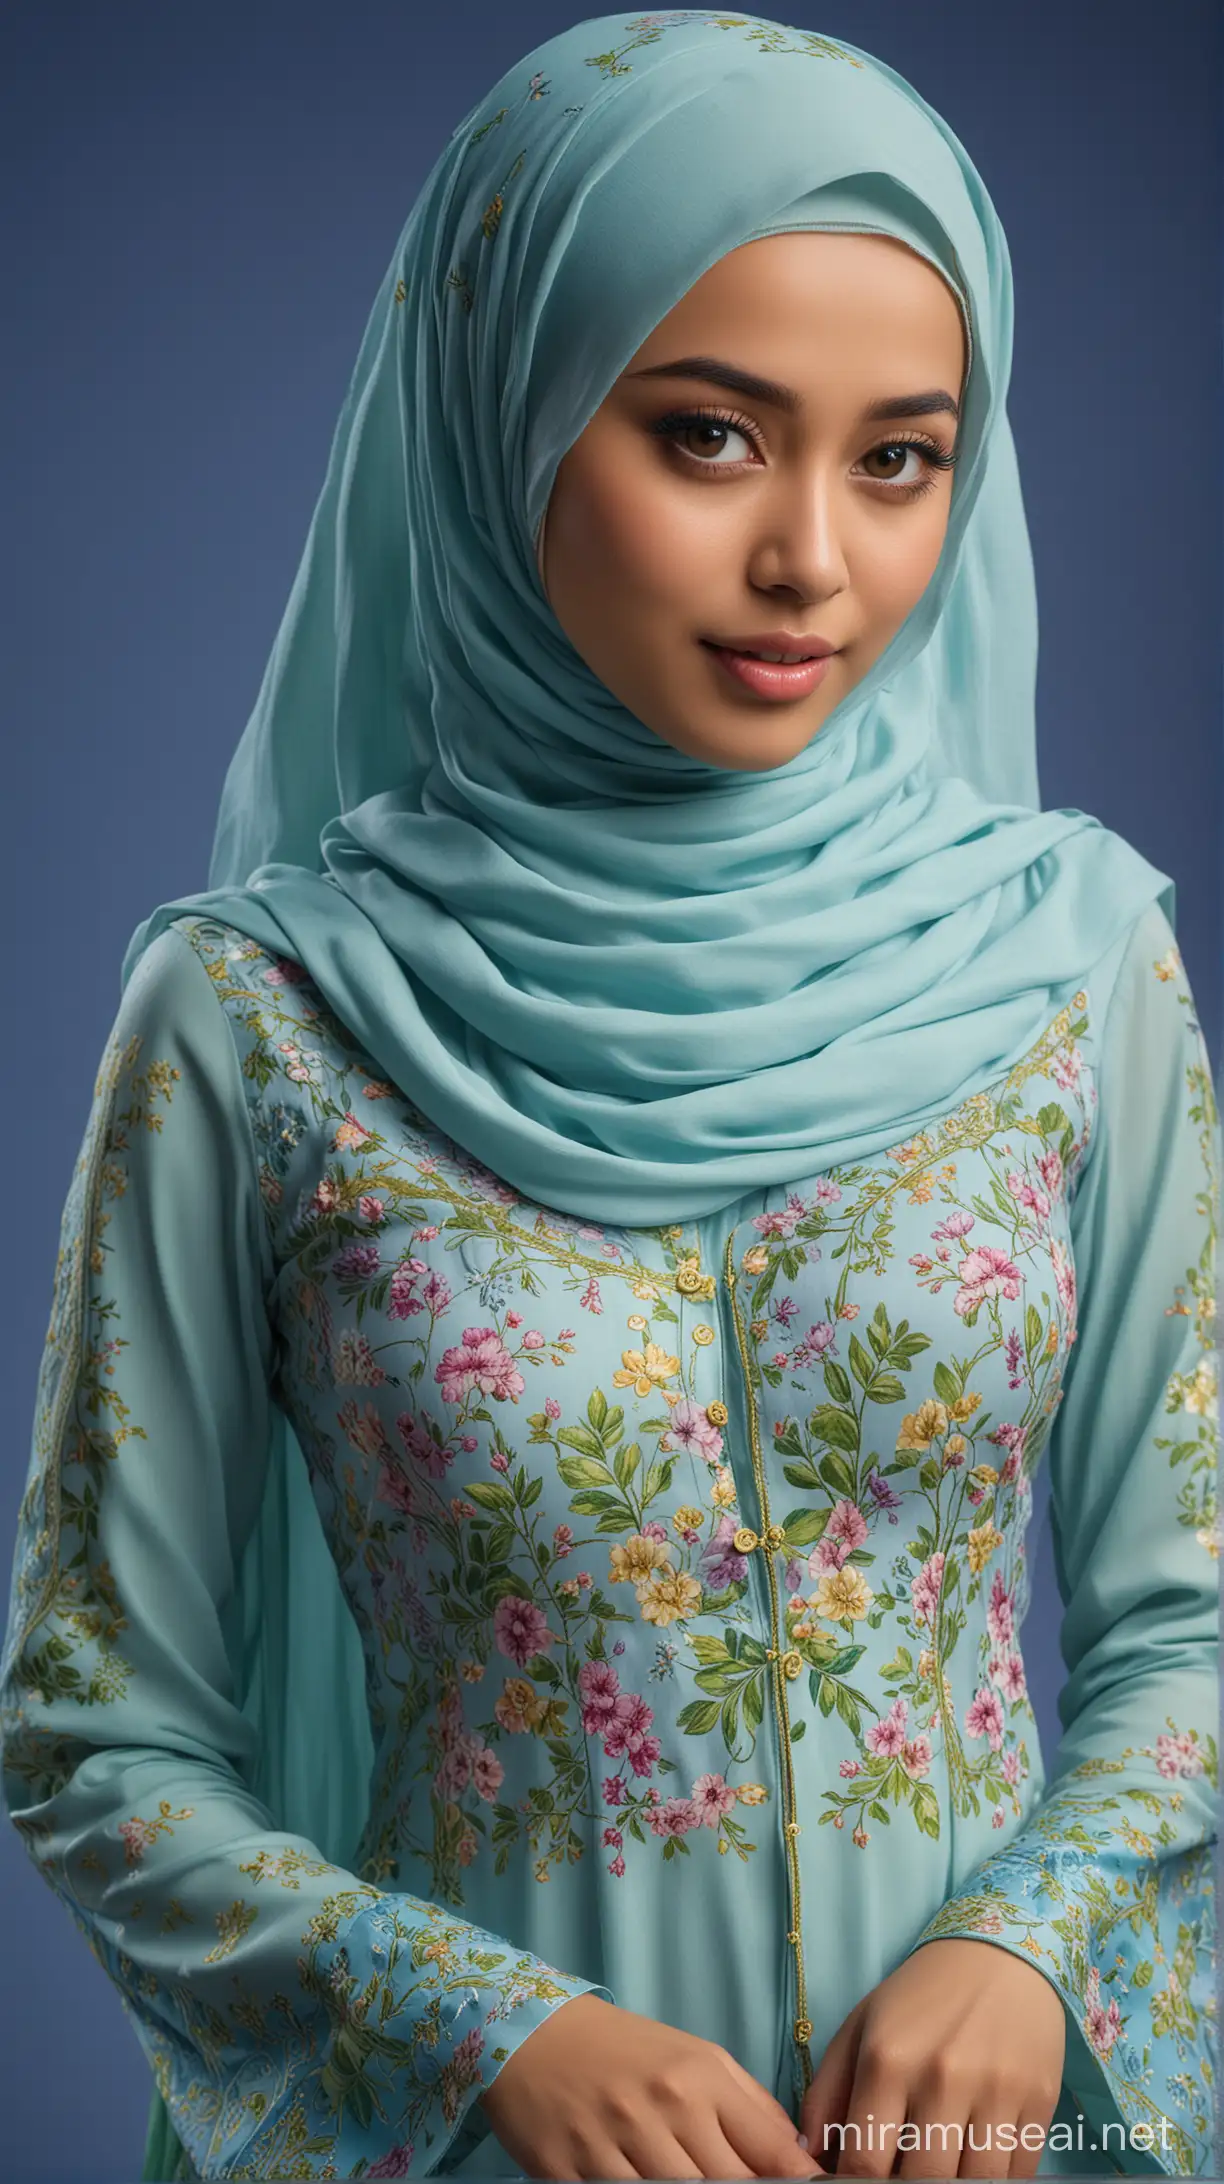 Elegant Malaysian Woman in Lavender and Green Baju Kurung on Blue Background